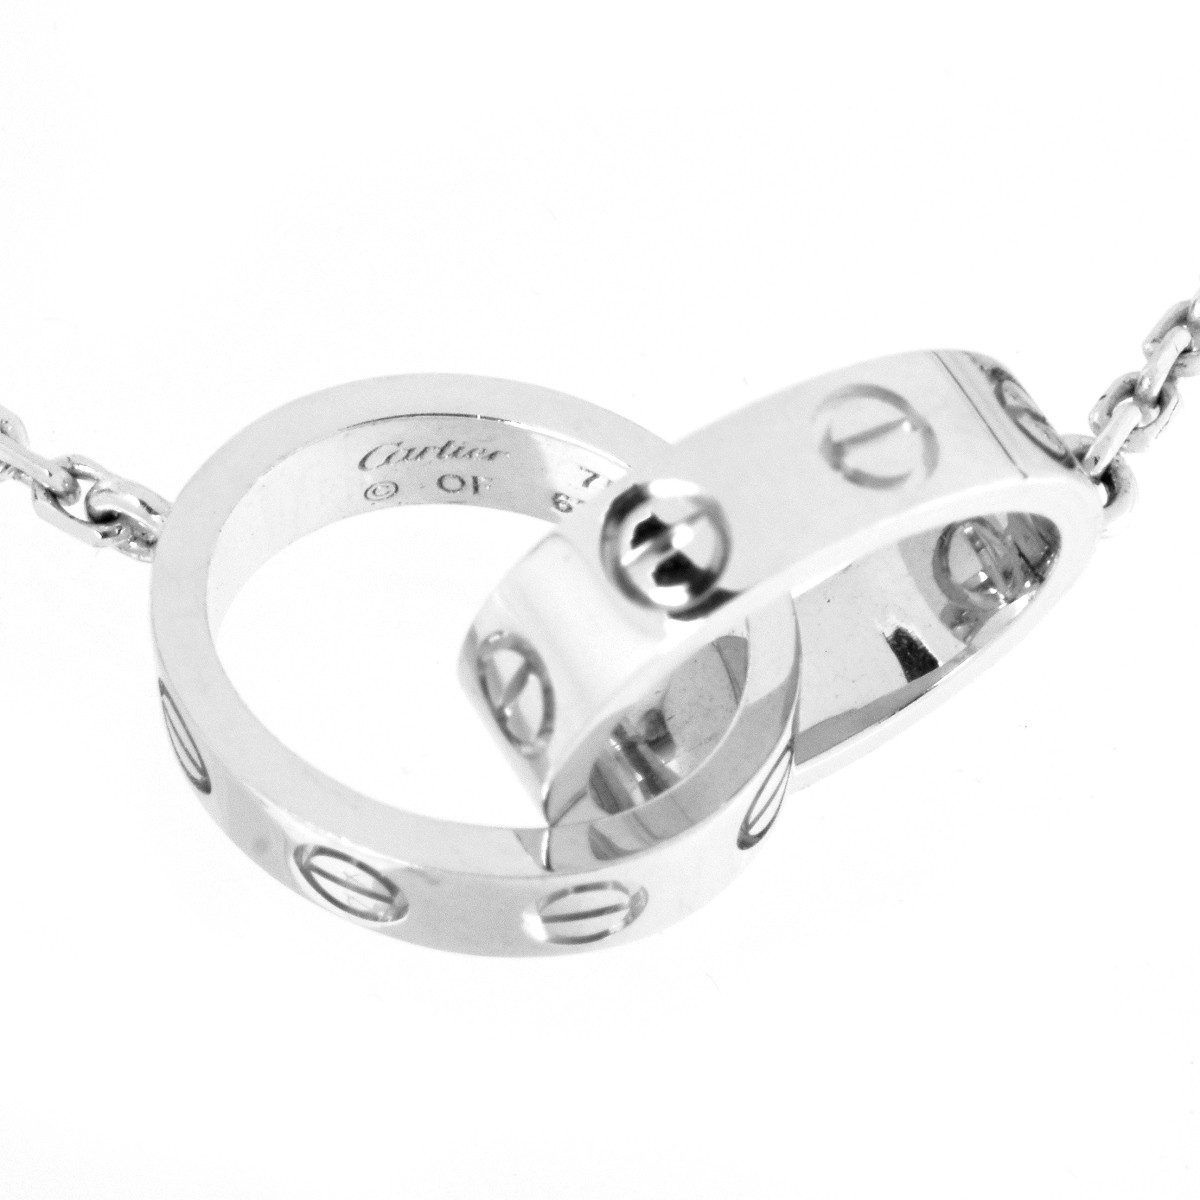 Cartier Love Ring Pendant Necklace